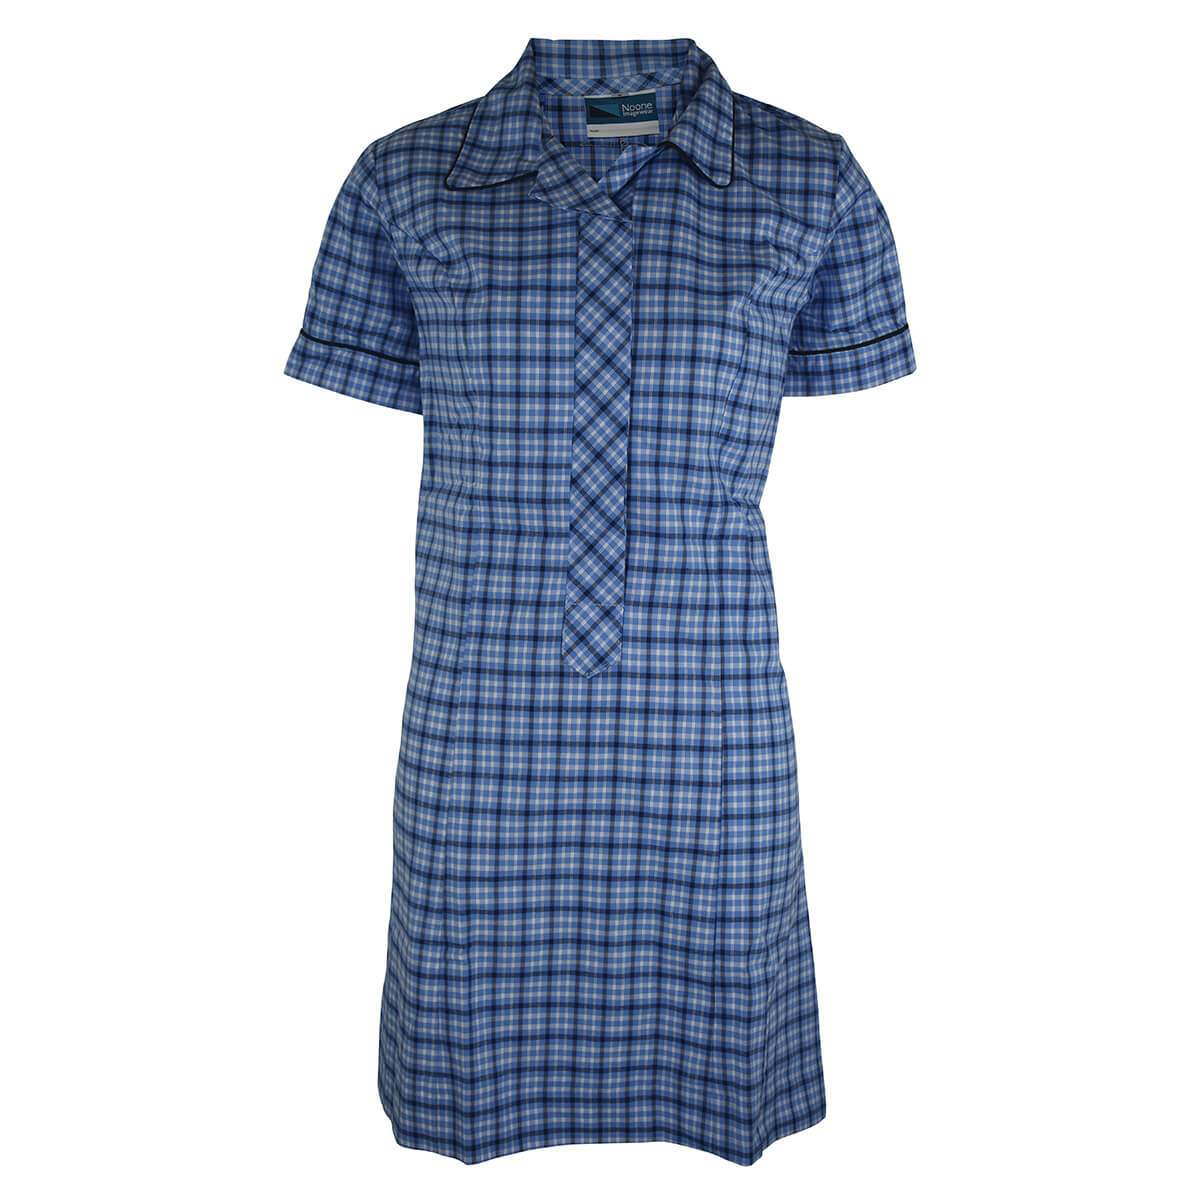 Summer Dress | Hoppers Crossing Secondary College | Noone